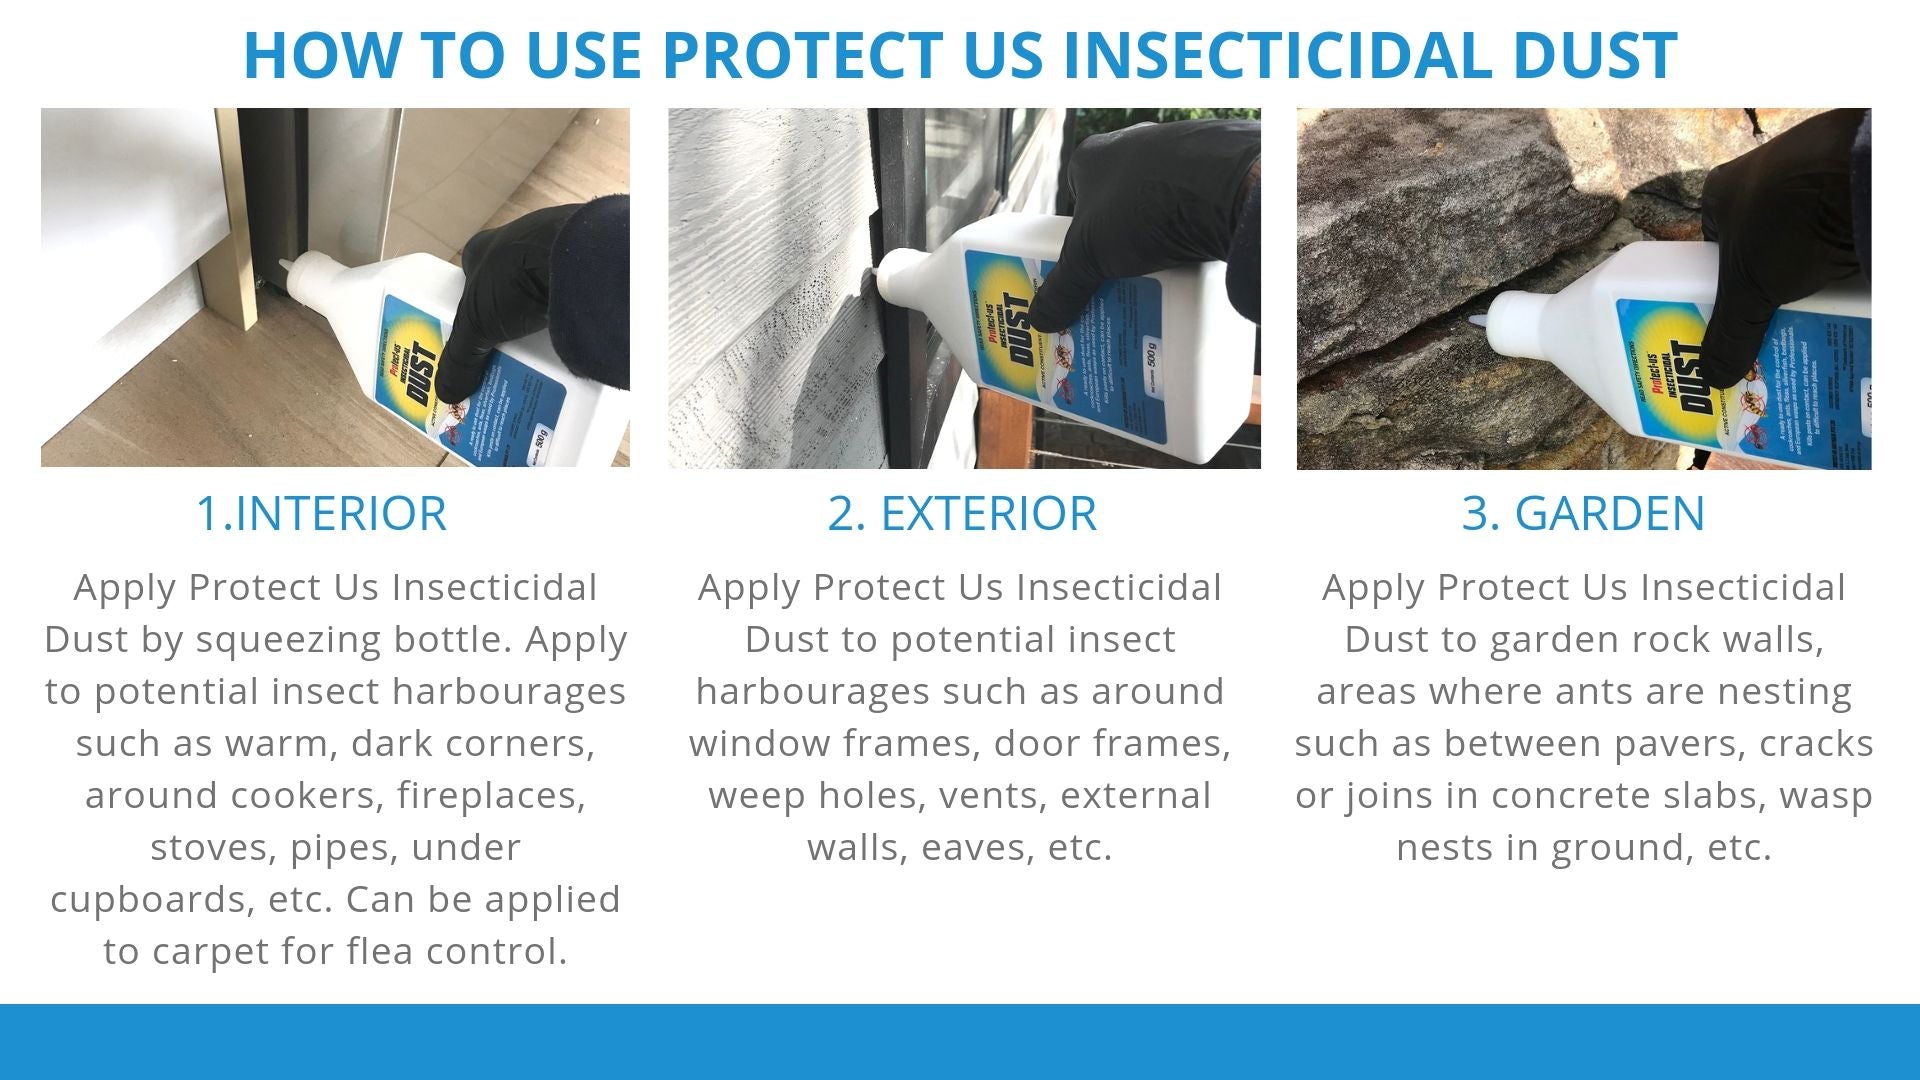 How to use Protect us Insecticidal Dust